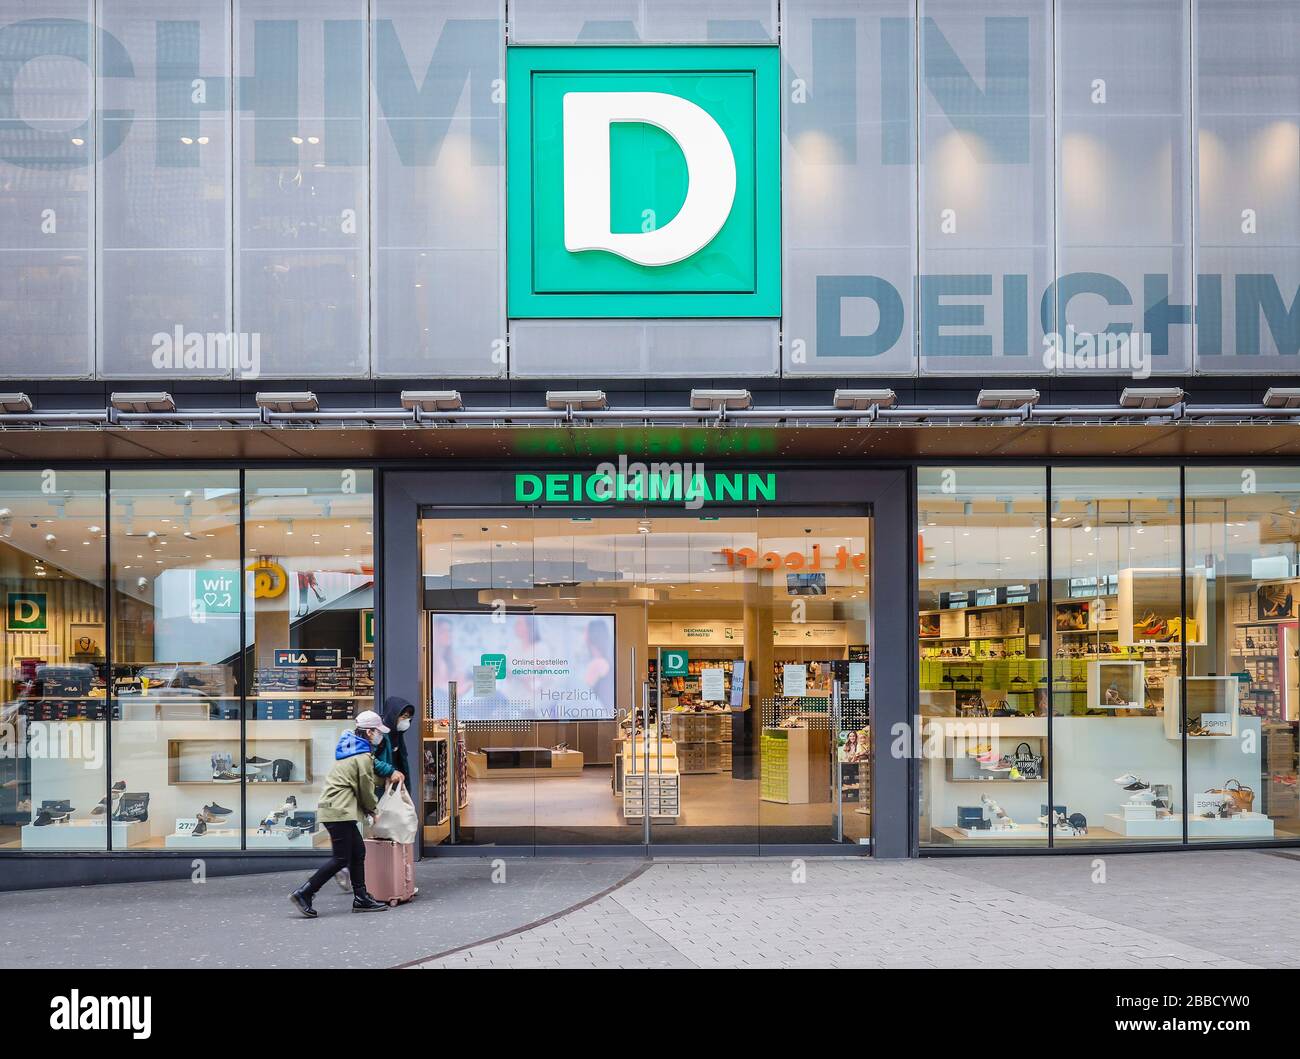 Deichmann Shoes High Resolution Stock Photography and Images - Alamy